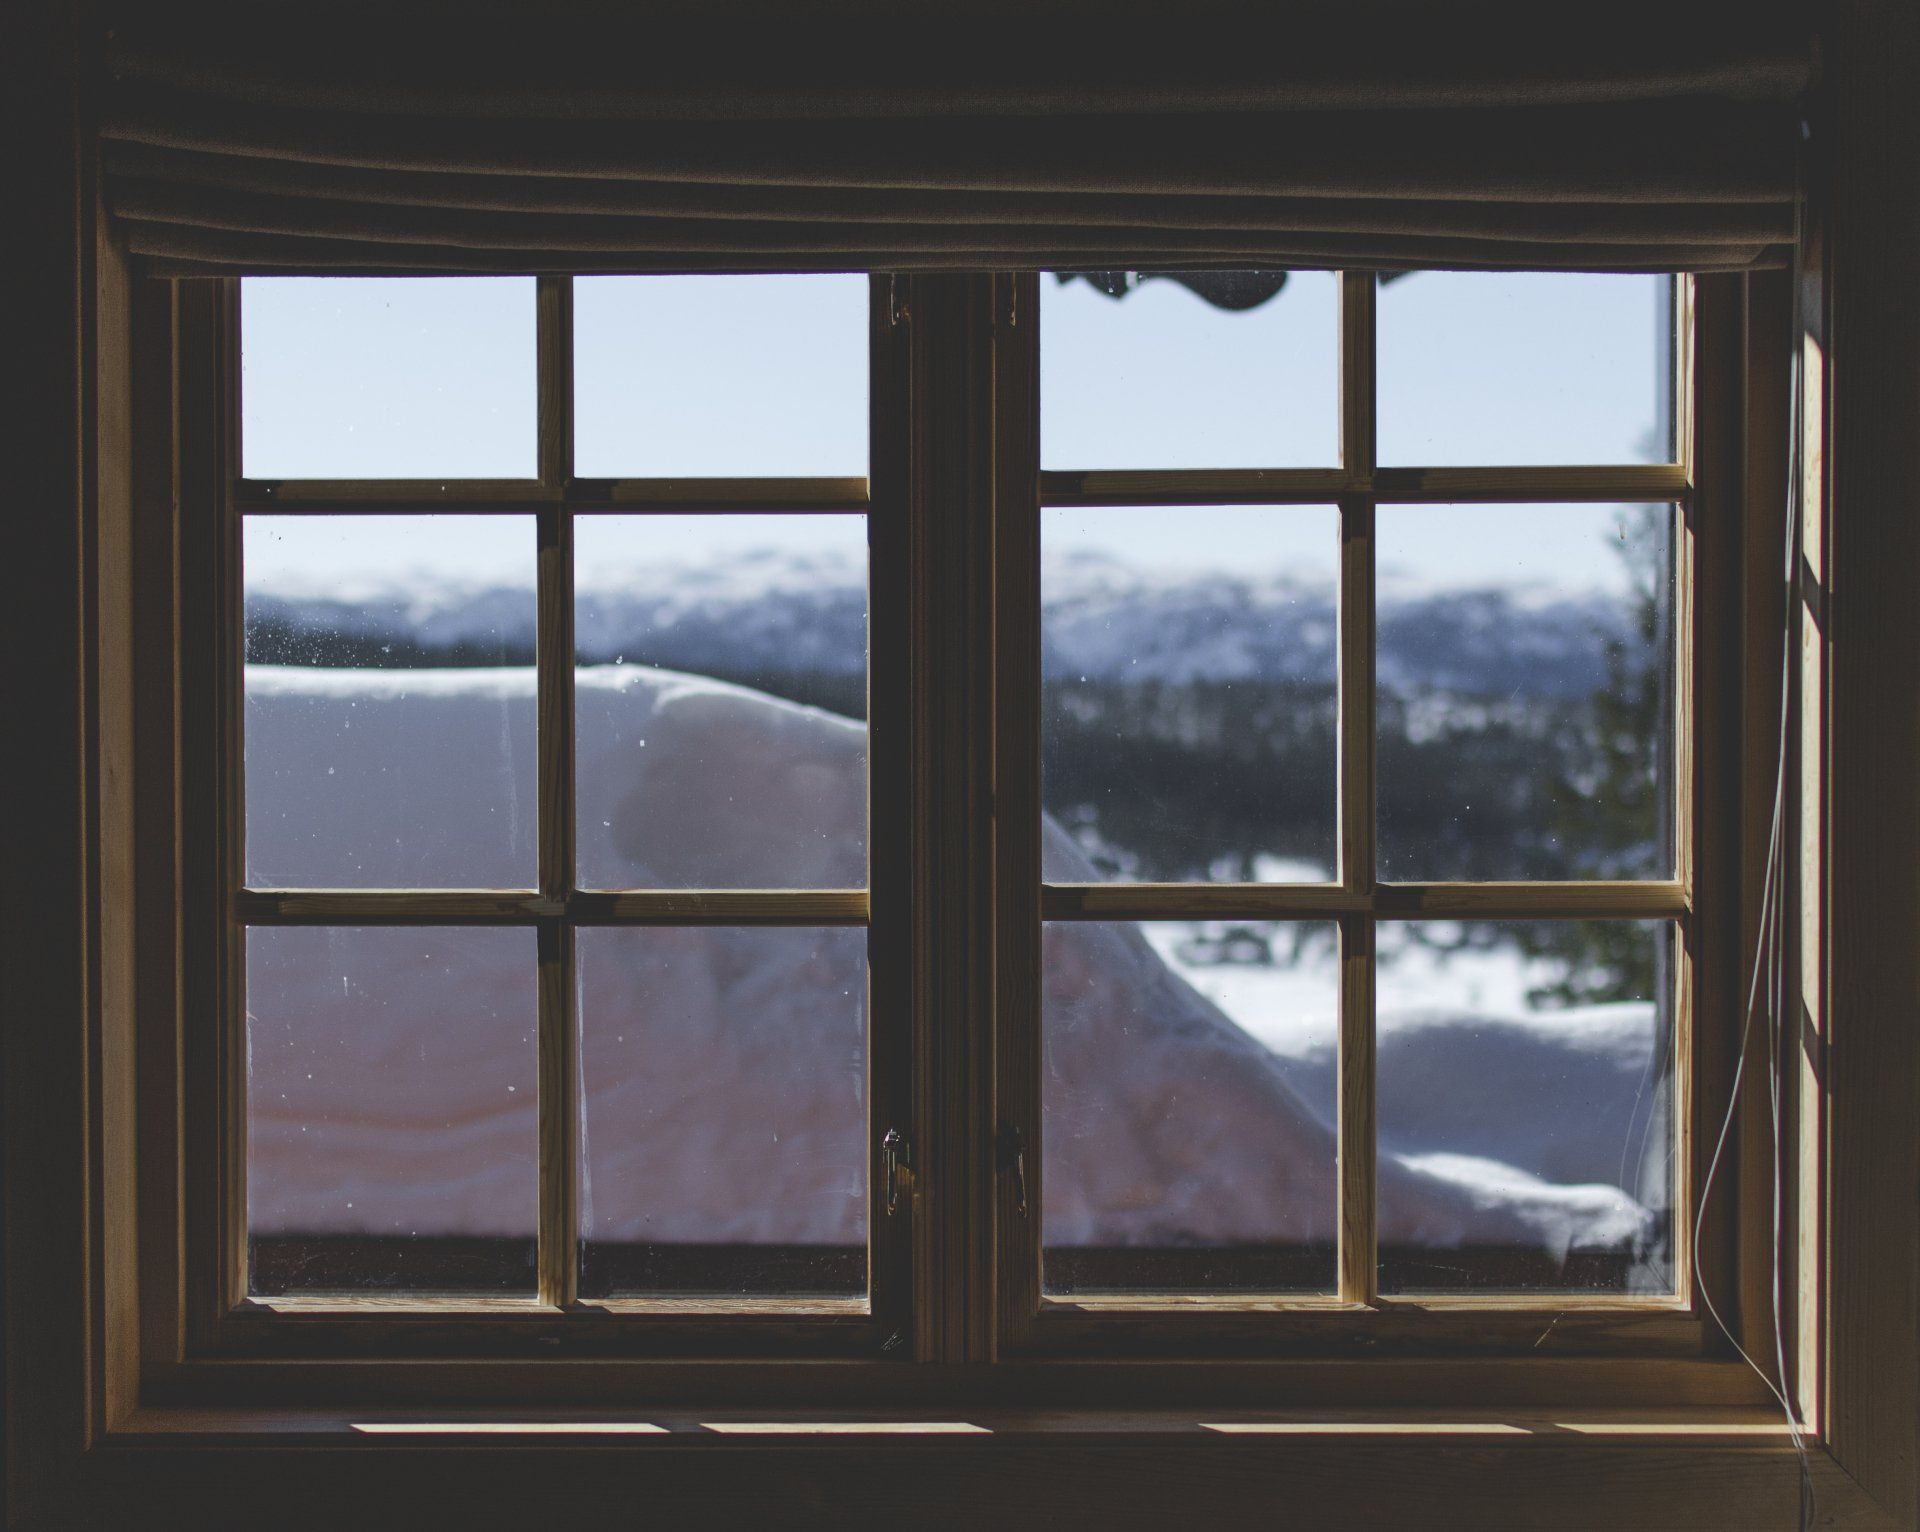 View of the snow-covered mountains through a window